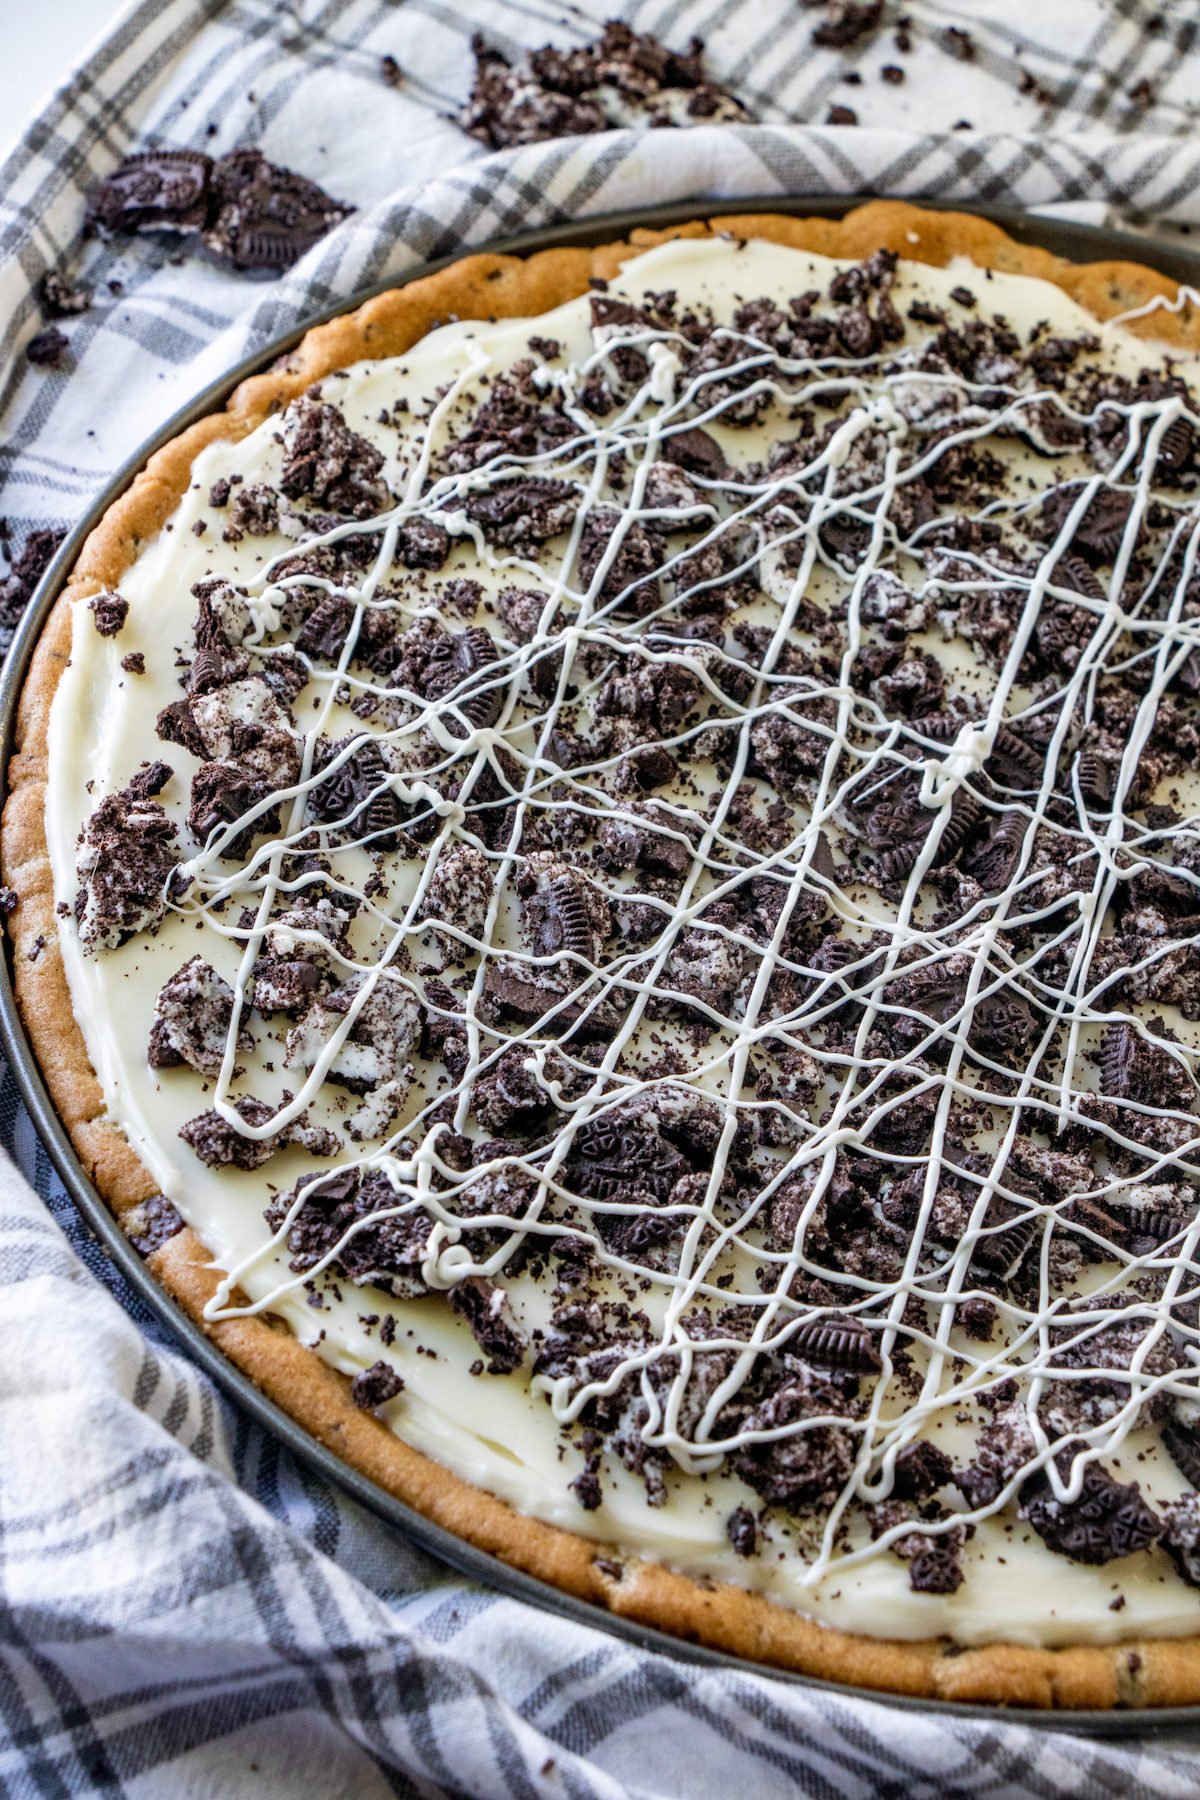 A cookies and cream pizza that has a chocolate chip cookie crust, cream "sauce", and crushed Oreos as a topping.